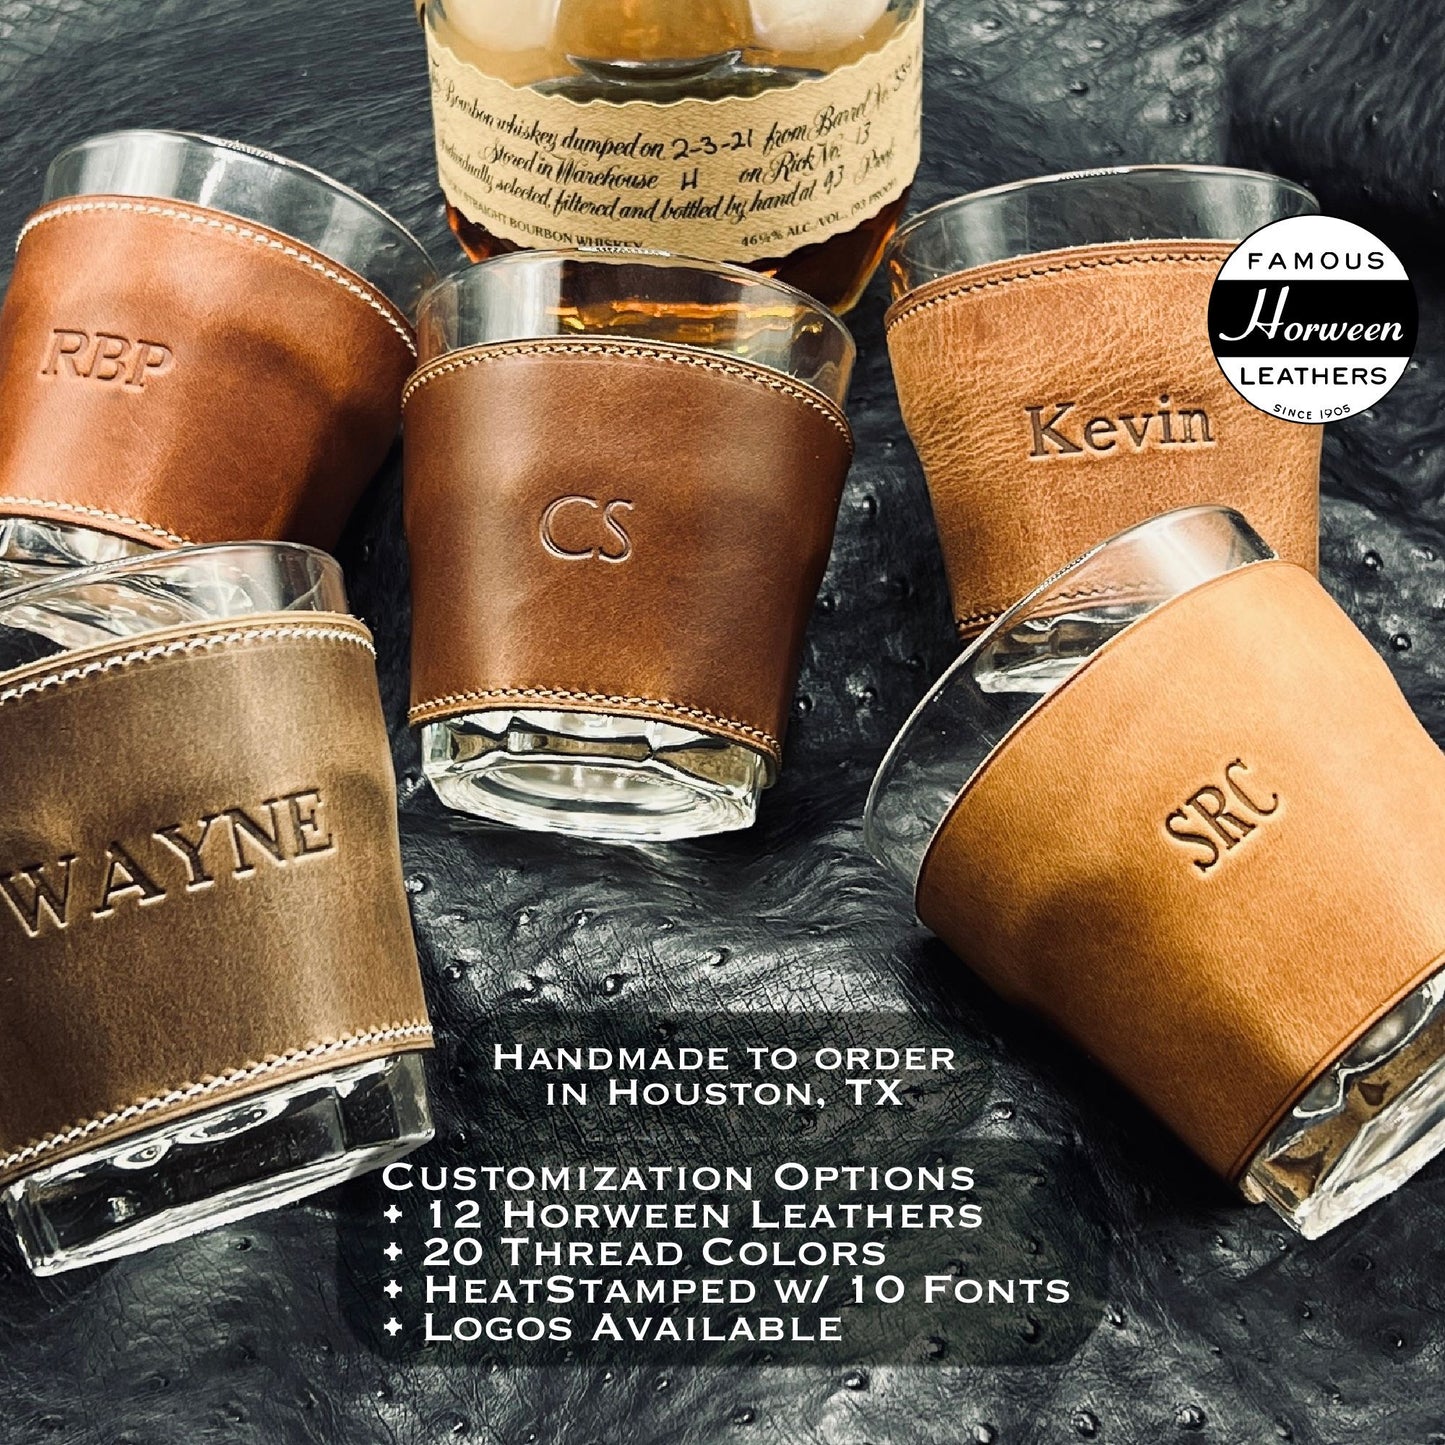 Horween Leather Wrapped Whiskey Glasses - Handmade to Order